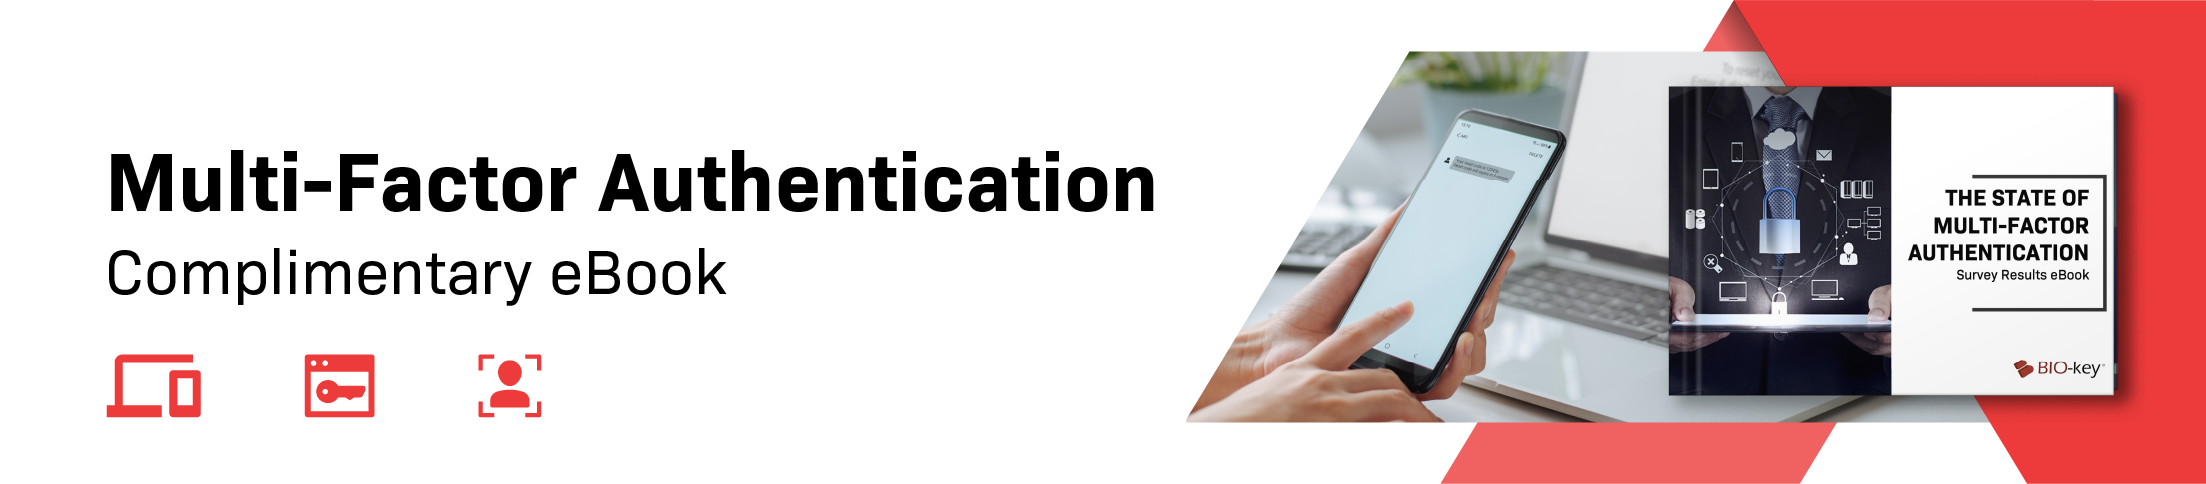 The State of Multi-Factor Authentication eBook